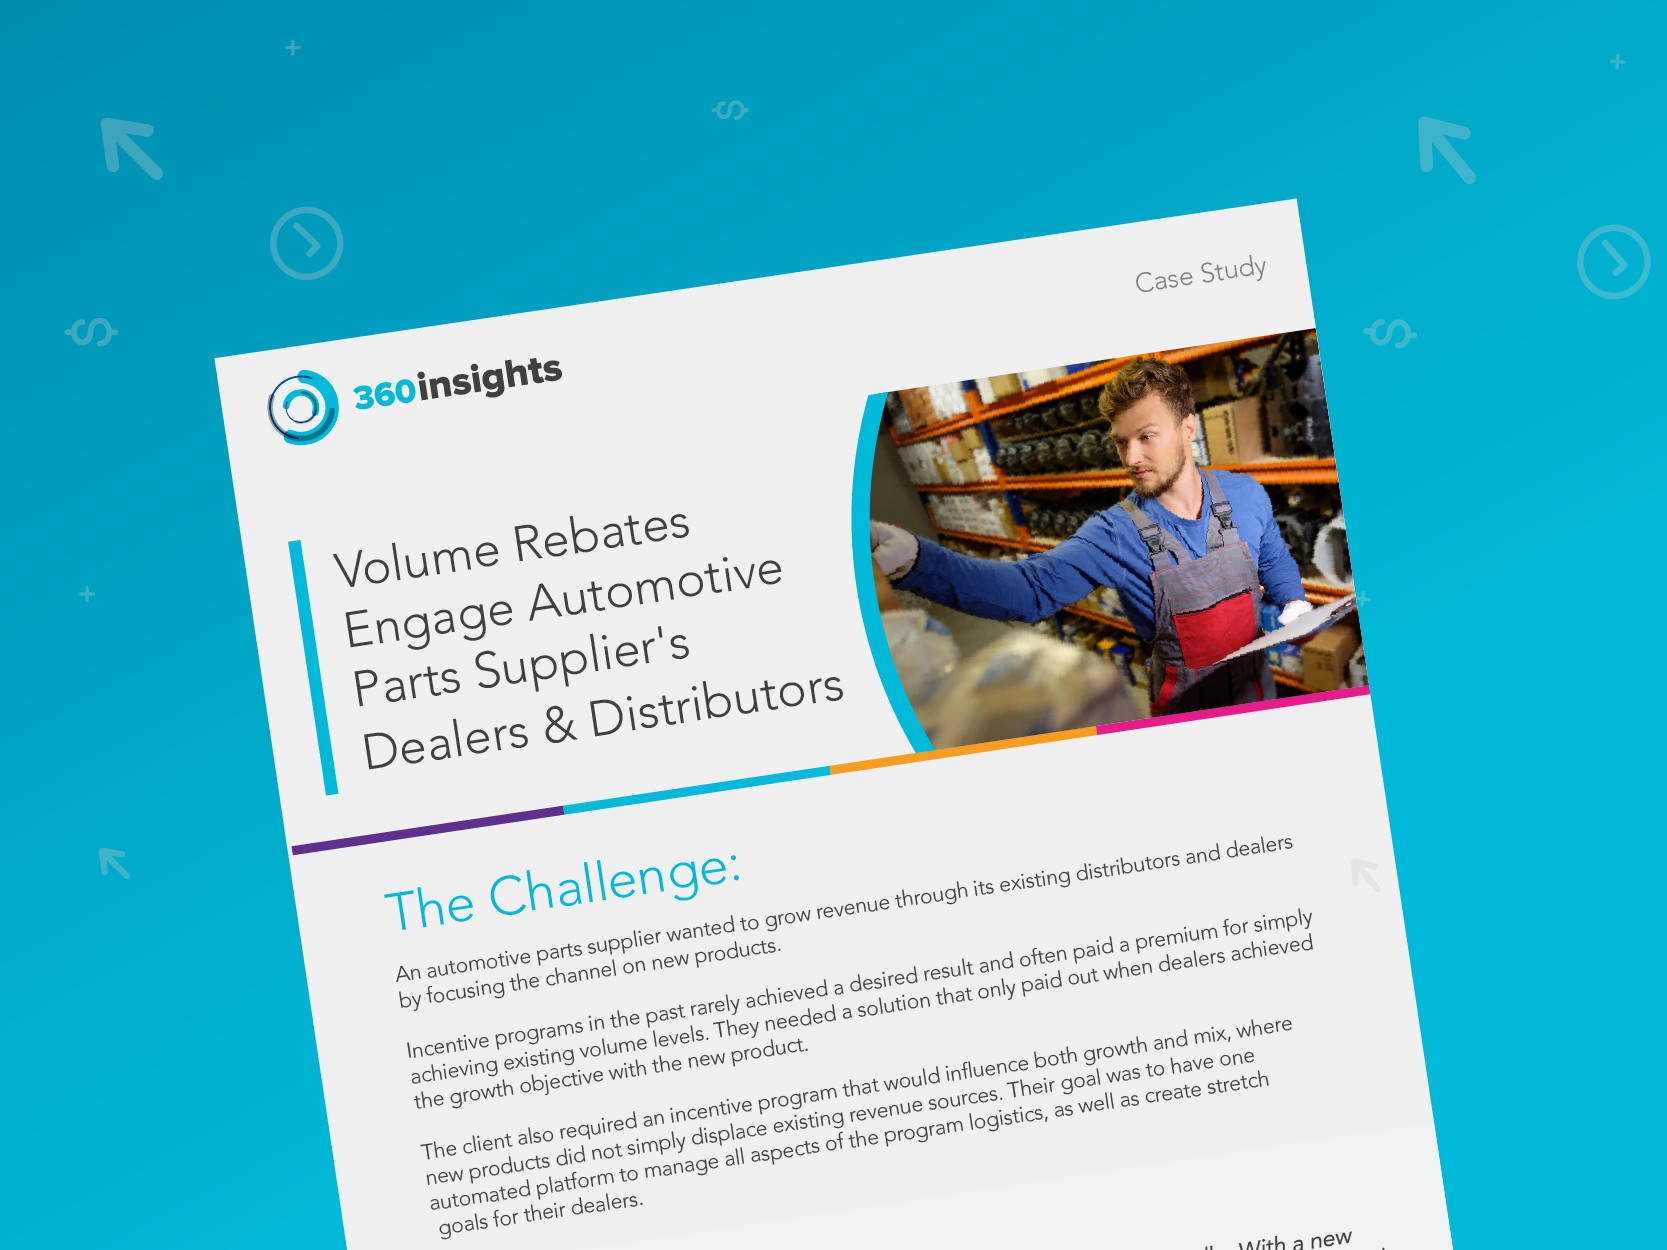 Case Study from an automotive parts supplier